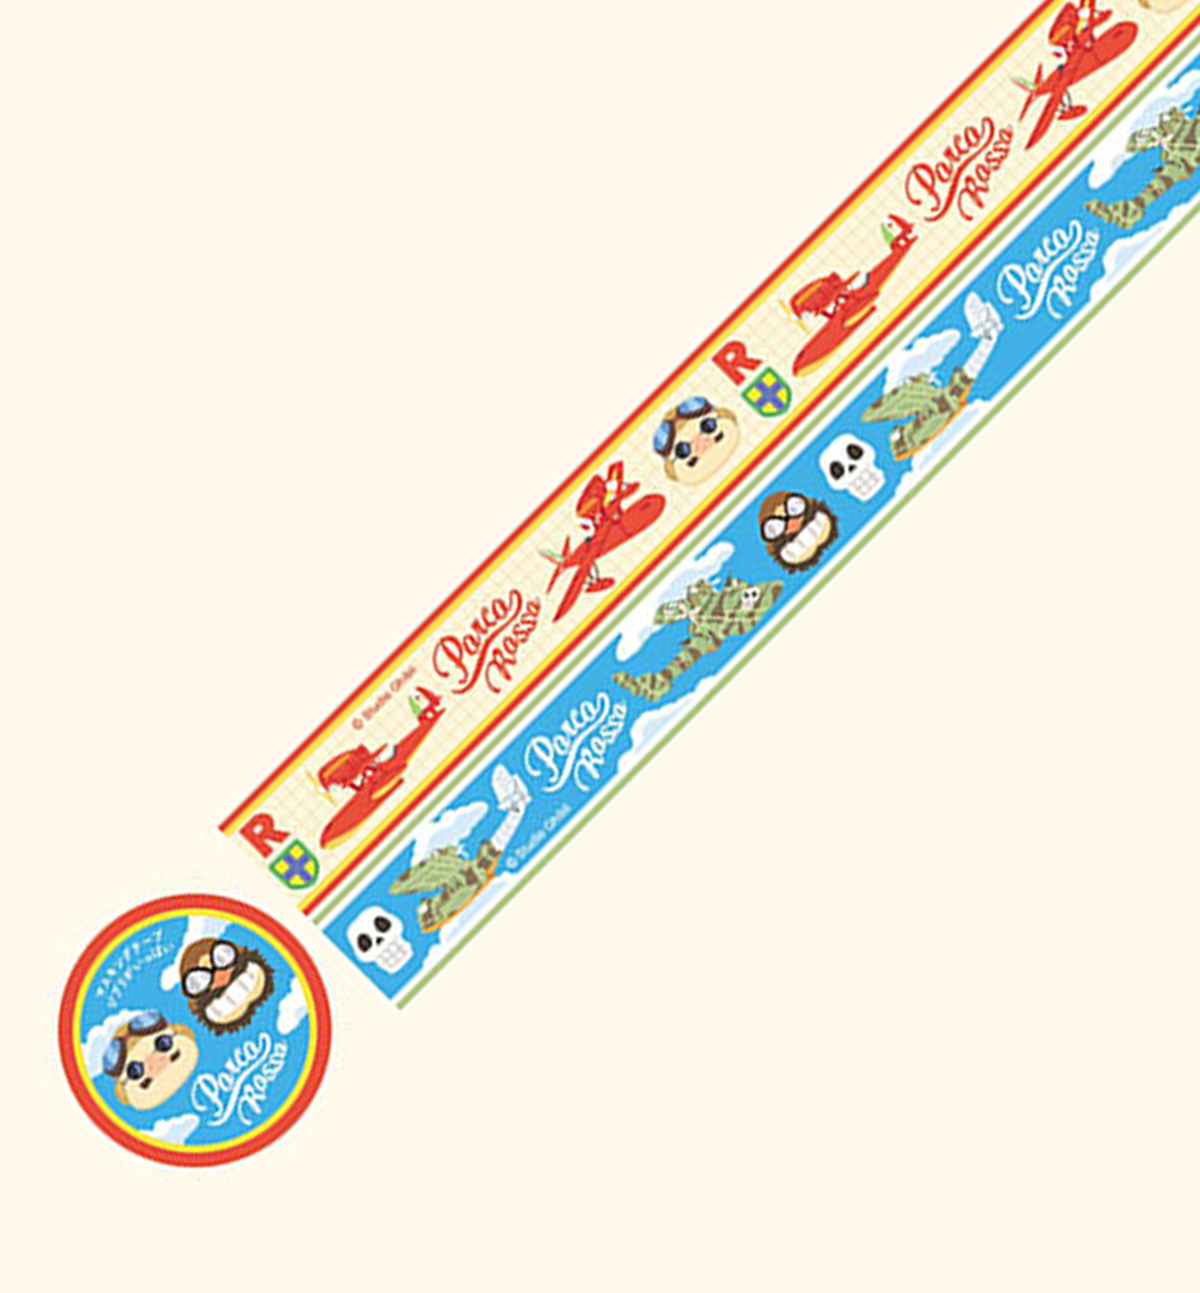 Porco Rosso Washi Tape [2 Rolls]